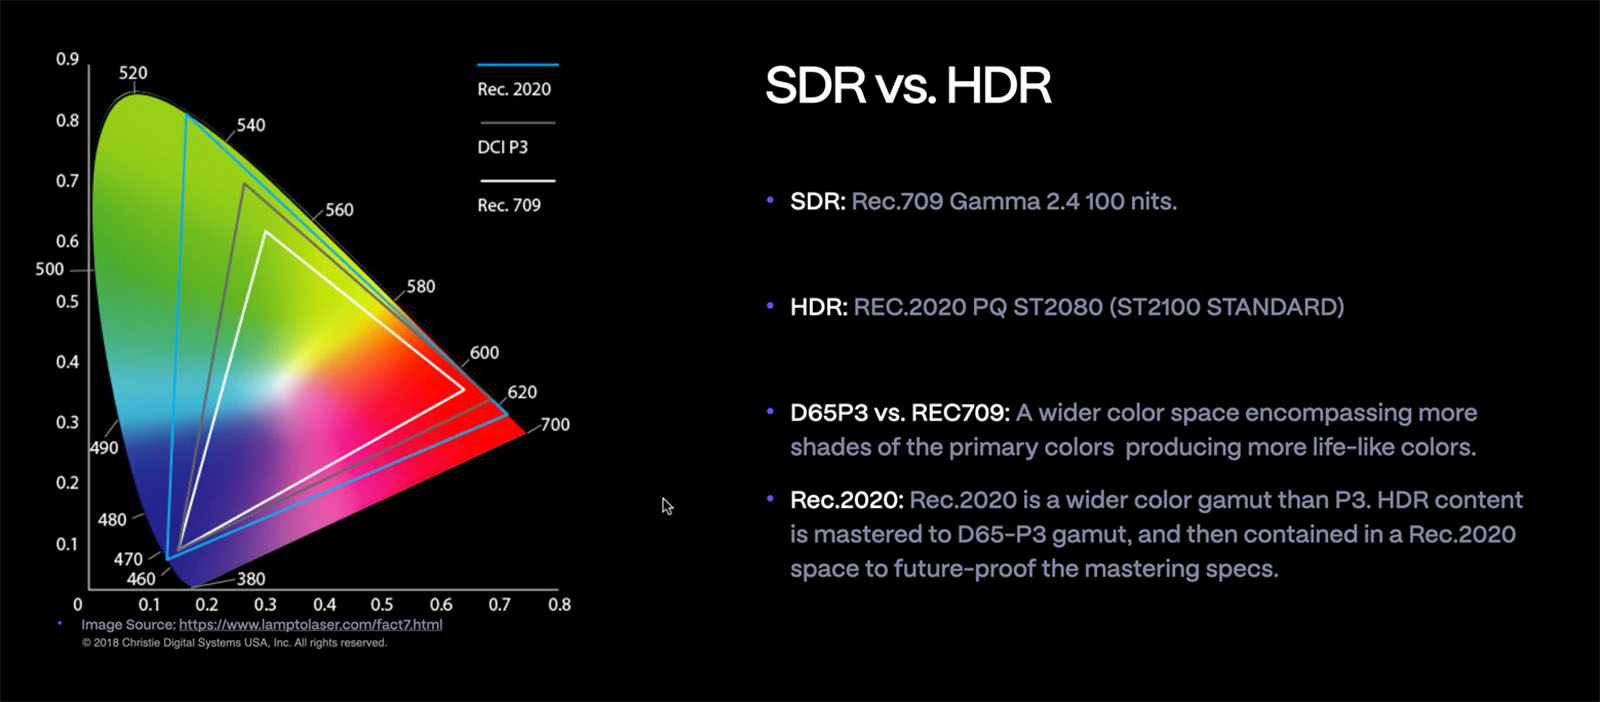 Comparing SDR and HDR color gamuts.